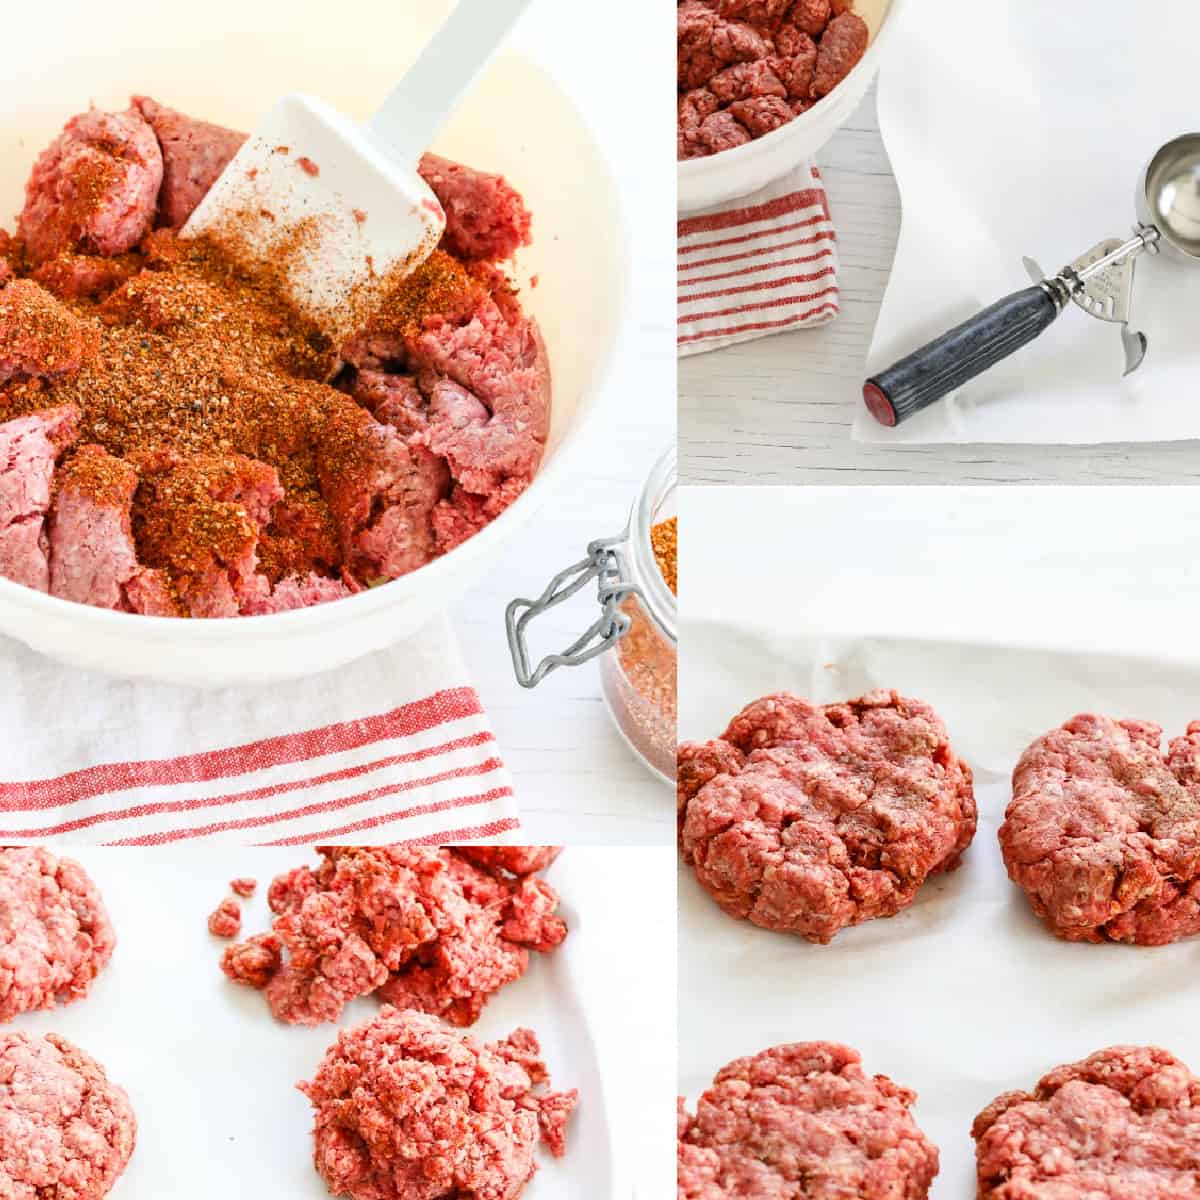 https://www.delicioustable.com/wp-content/uploads/2021/06/Burger-Seasoning-featured.jpg